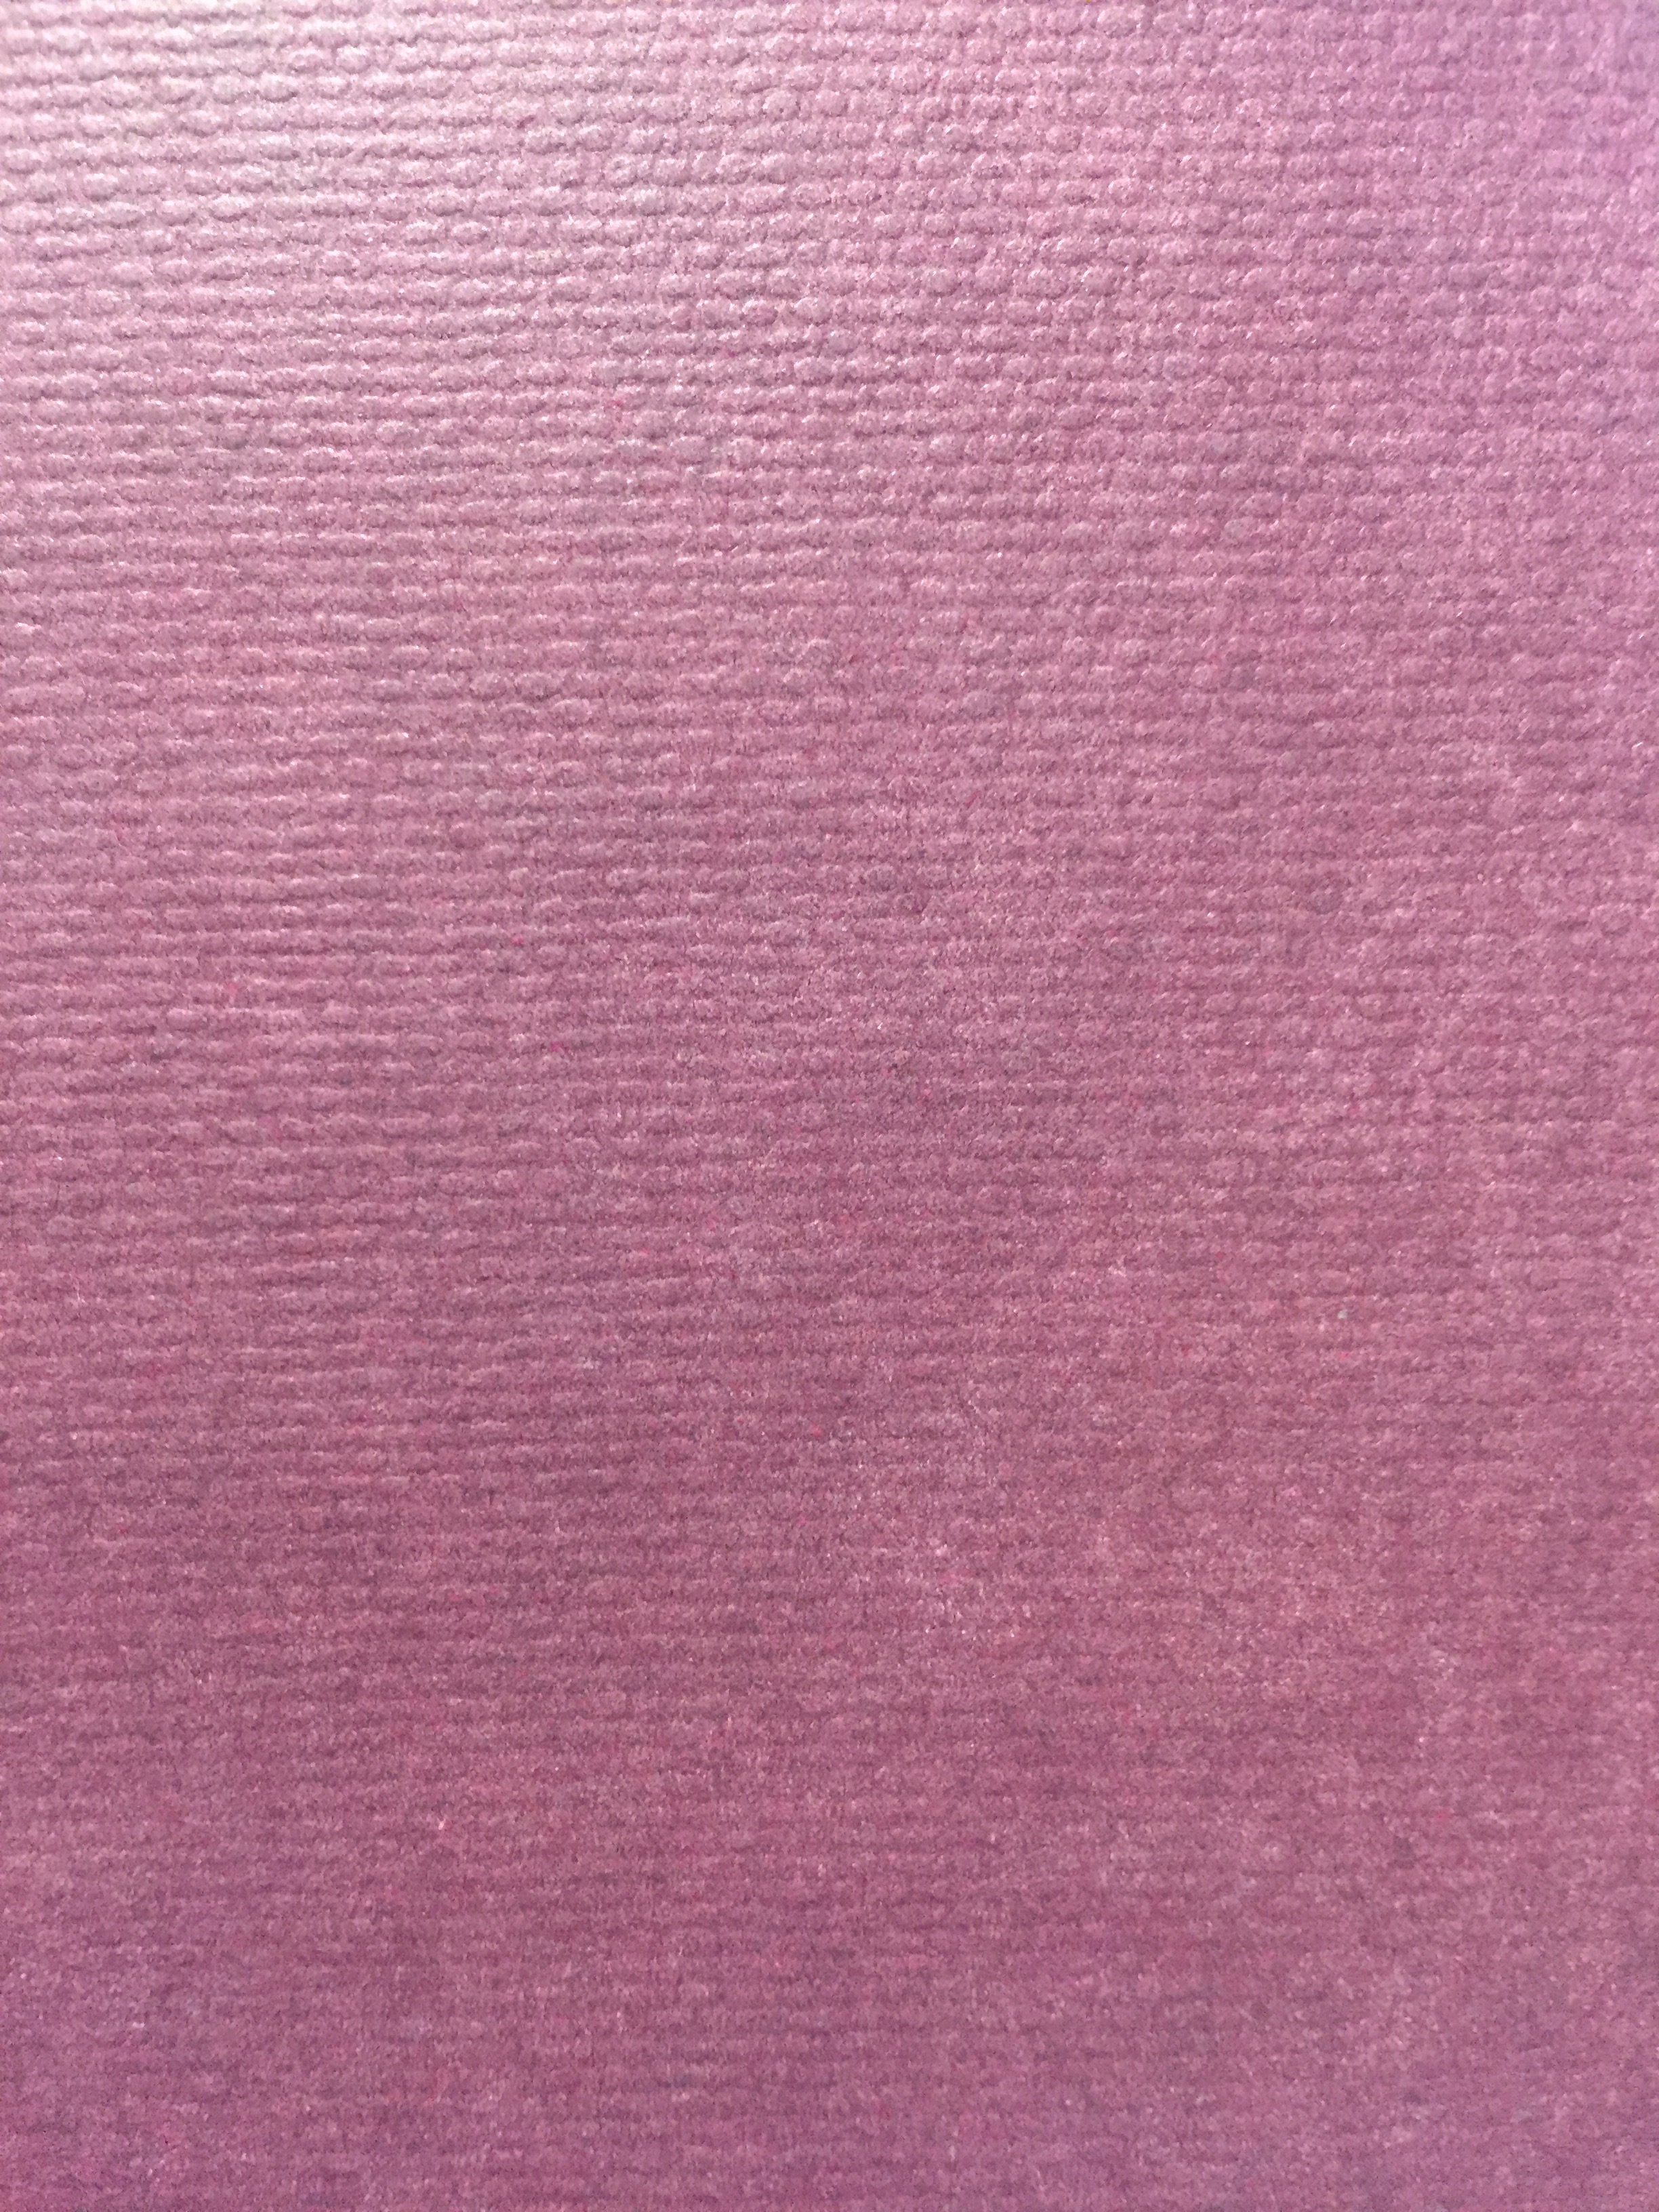 Purple Paper Texture with Flecks Picture, Free Photograph